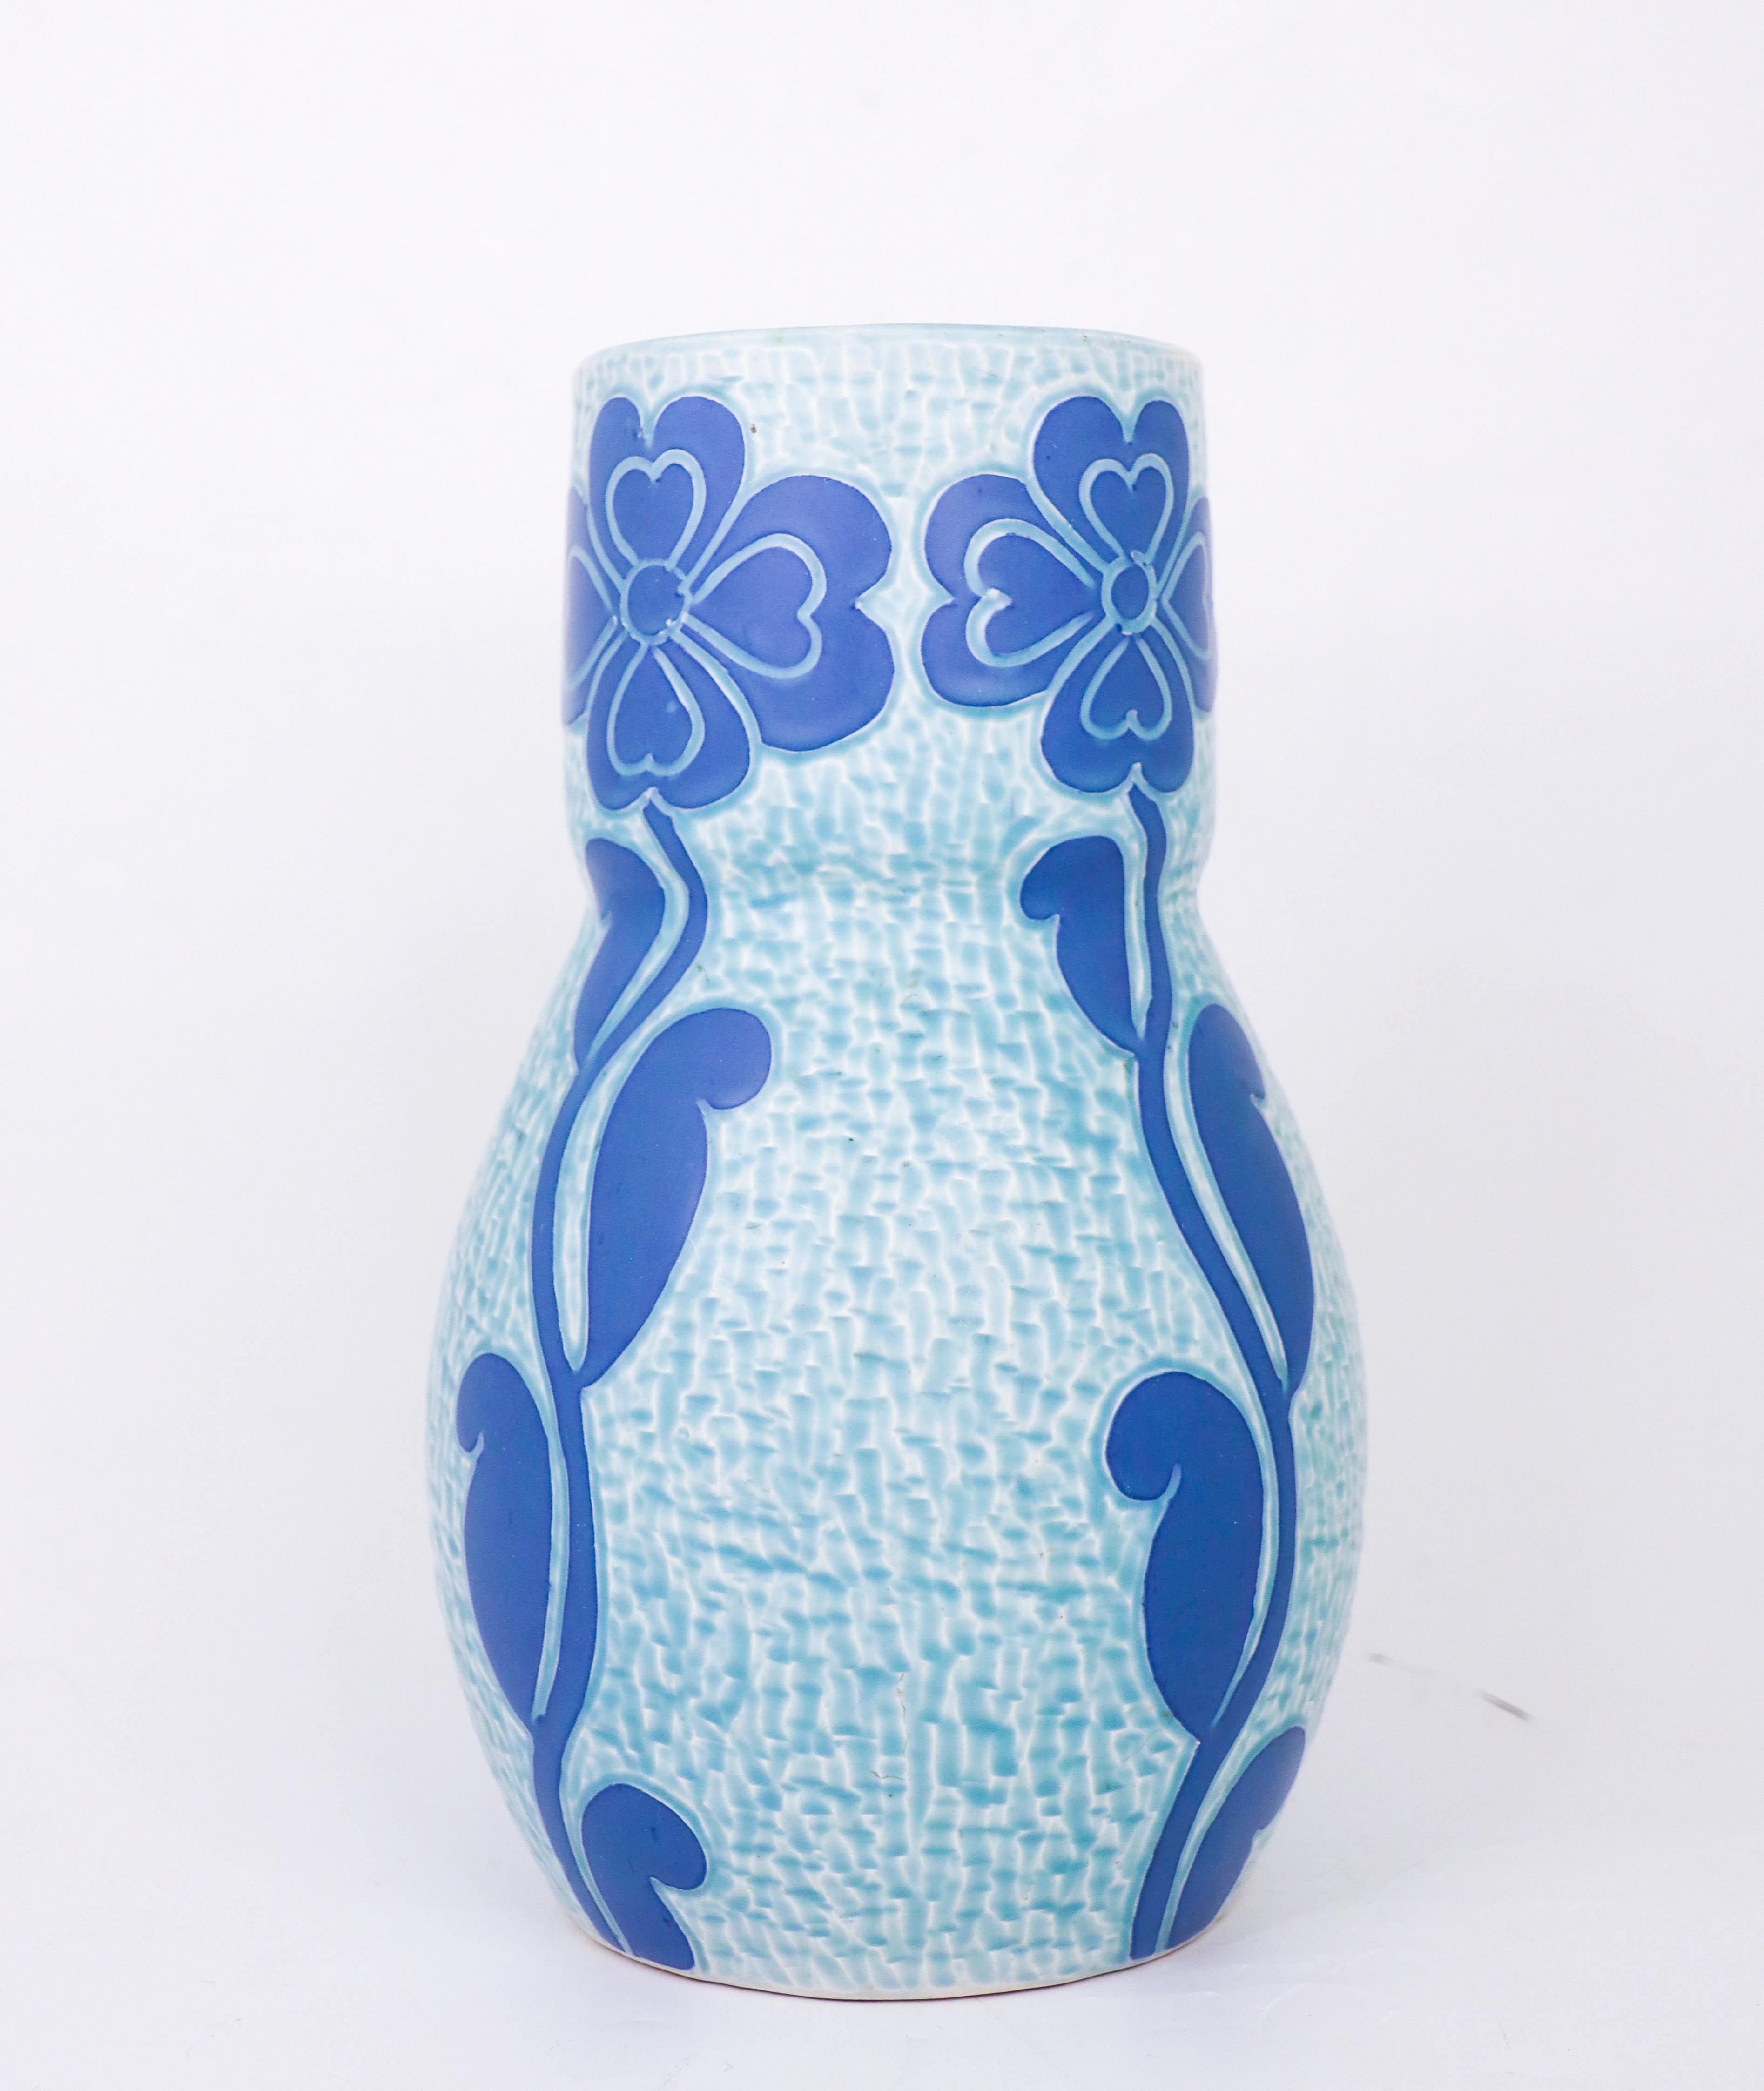 An art nouveau vase in ceramics designed by Josef Ekberg at Gustavsberg in 1920, this vase is from the classic Sgrafitto-serie. The vase is 23.5 cm (9.4